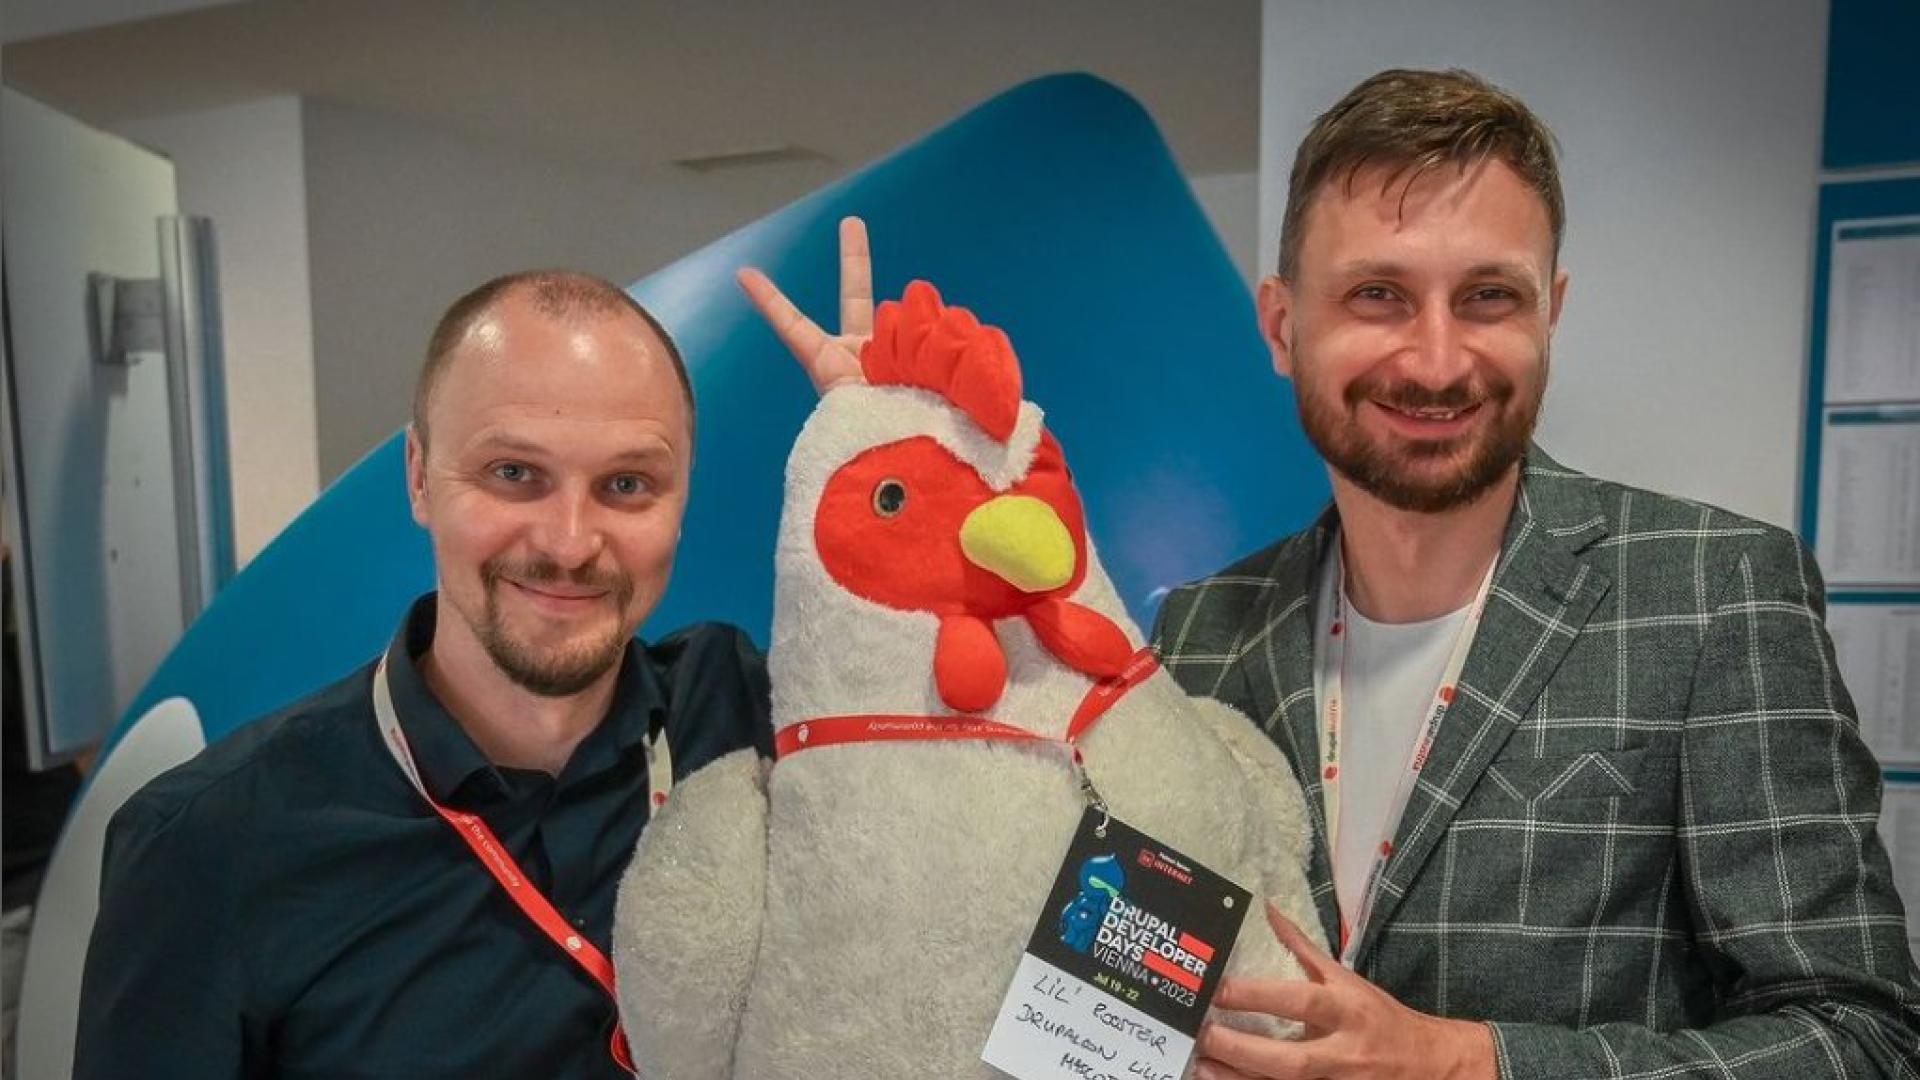 winners of little rooster contest held at drupal developer days 2023 Vienna and got awarded free tickets to DrupalCon Lille 2023